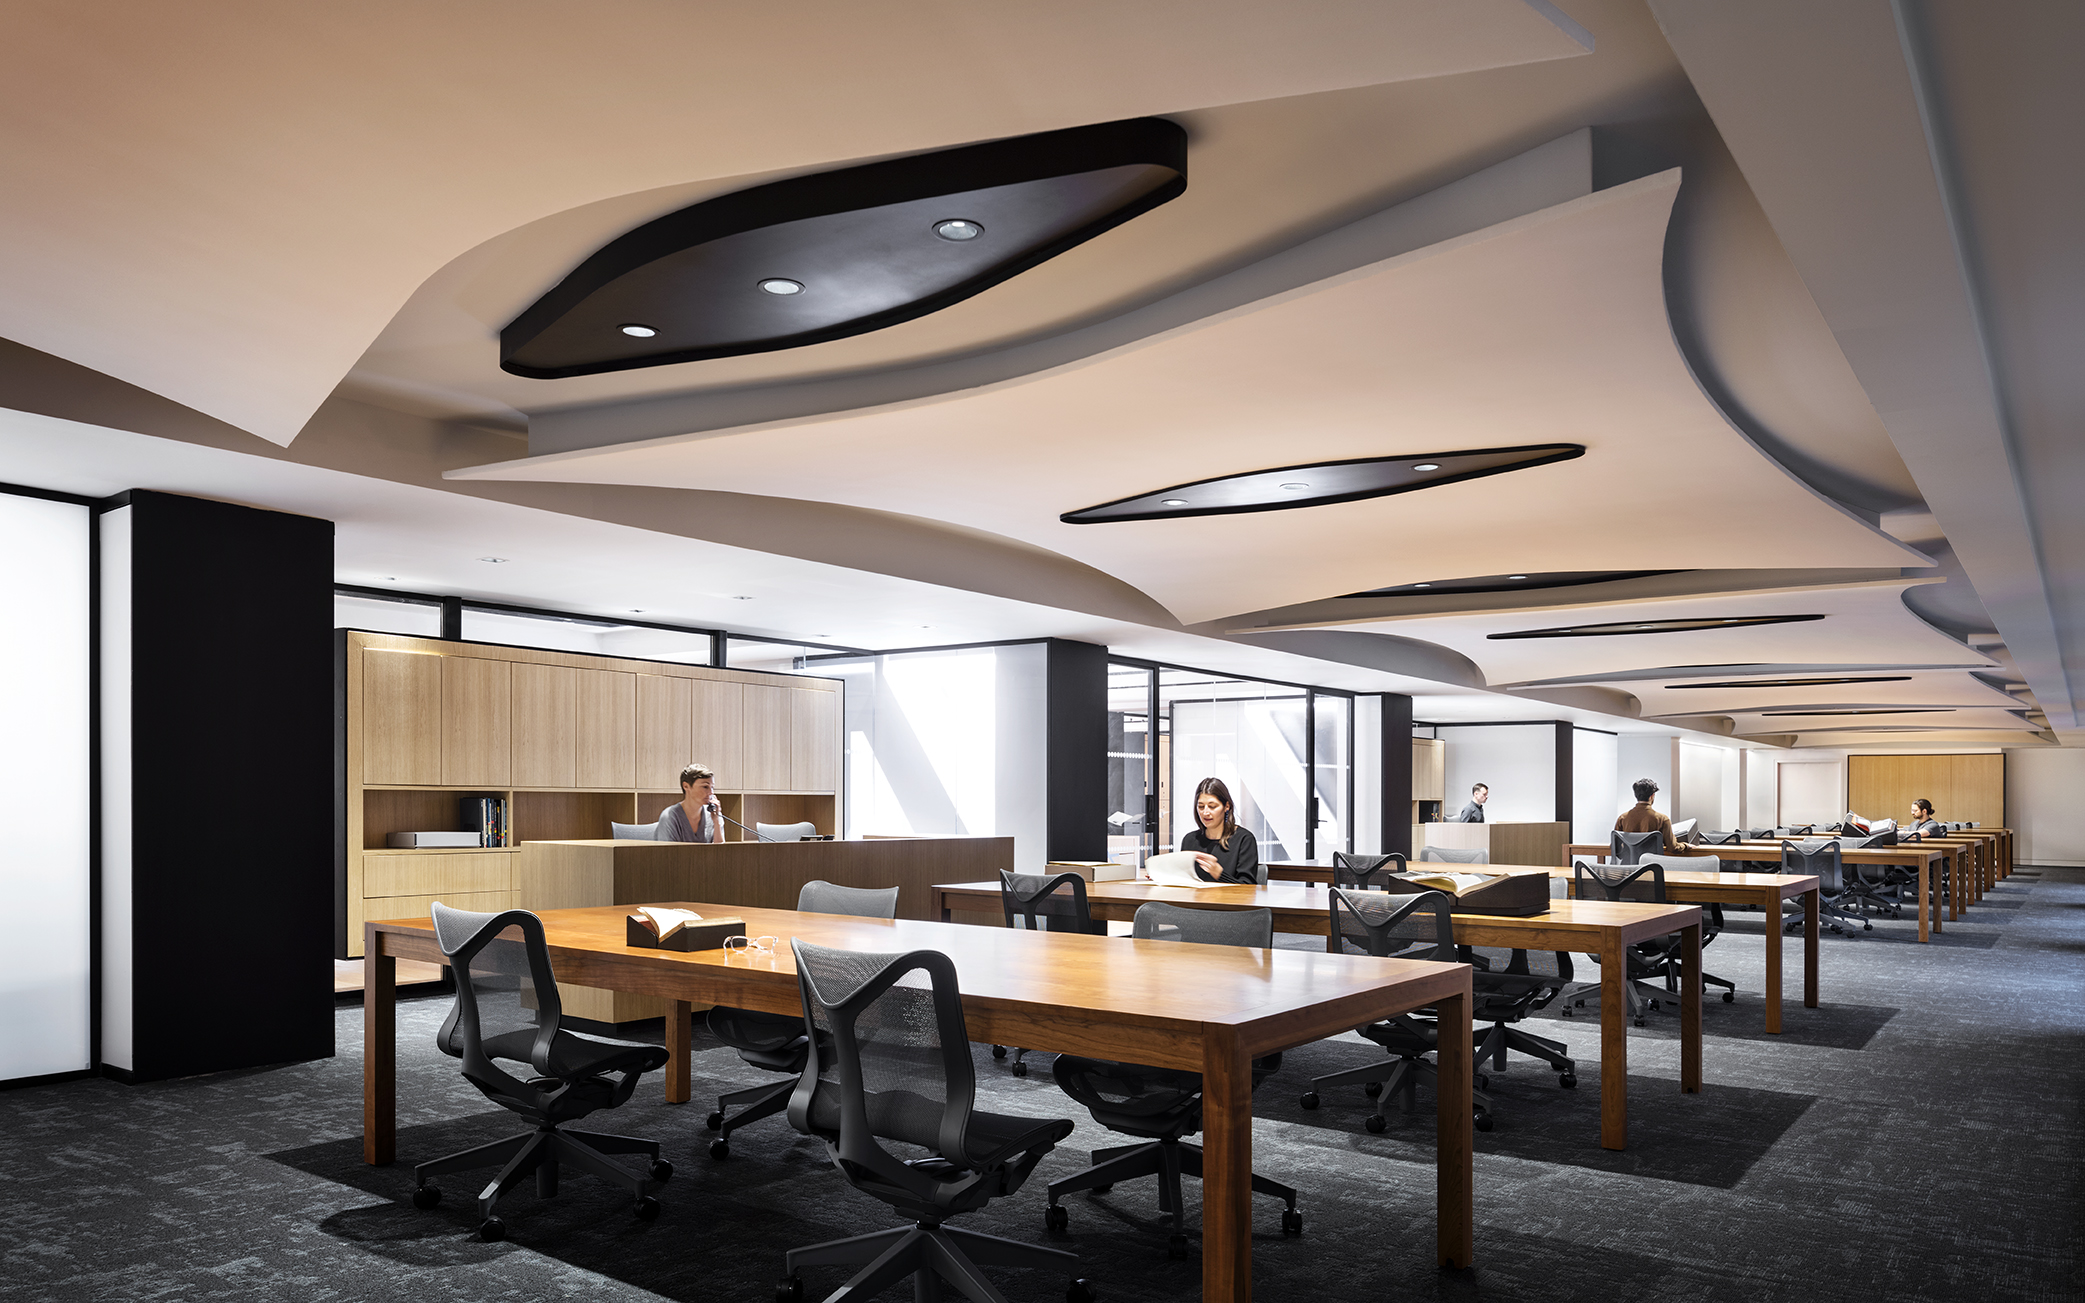 Interiors Merit Award: NYU Bobst Library Special Collections Renovation by CannonDesign, in New York, NY. Photo: Scott Frances.